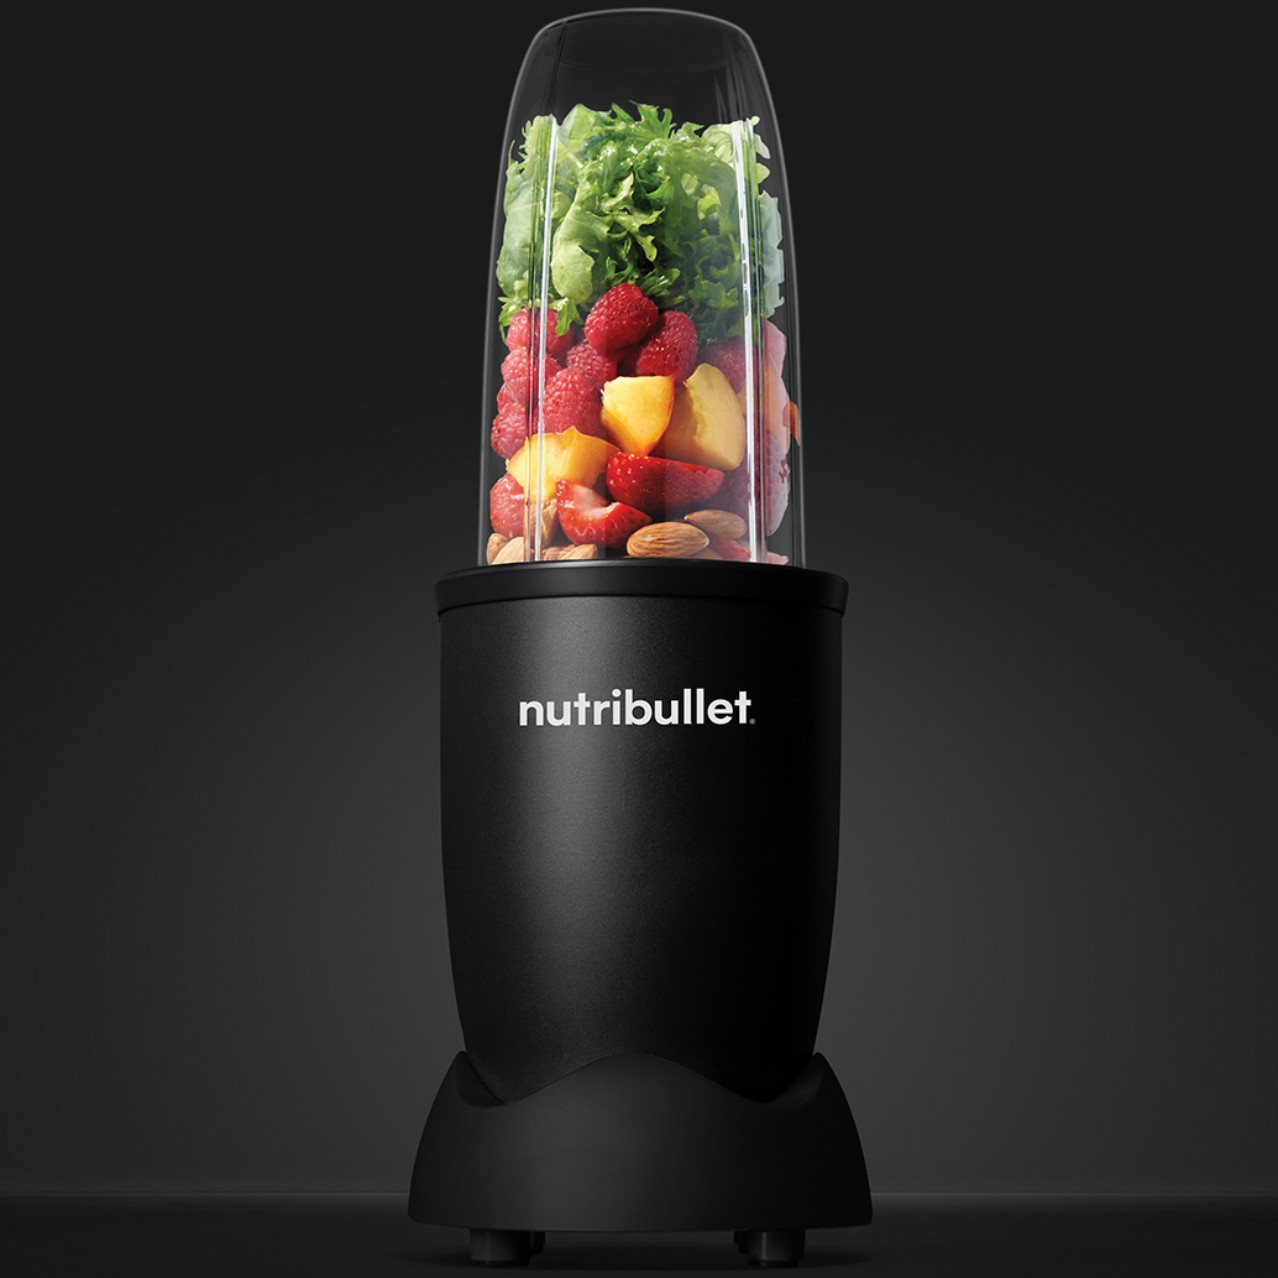 The new and improved Nutribullet is worth the hype